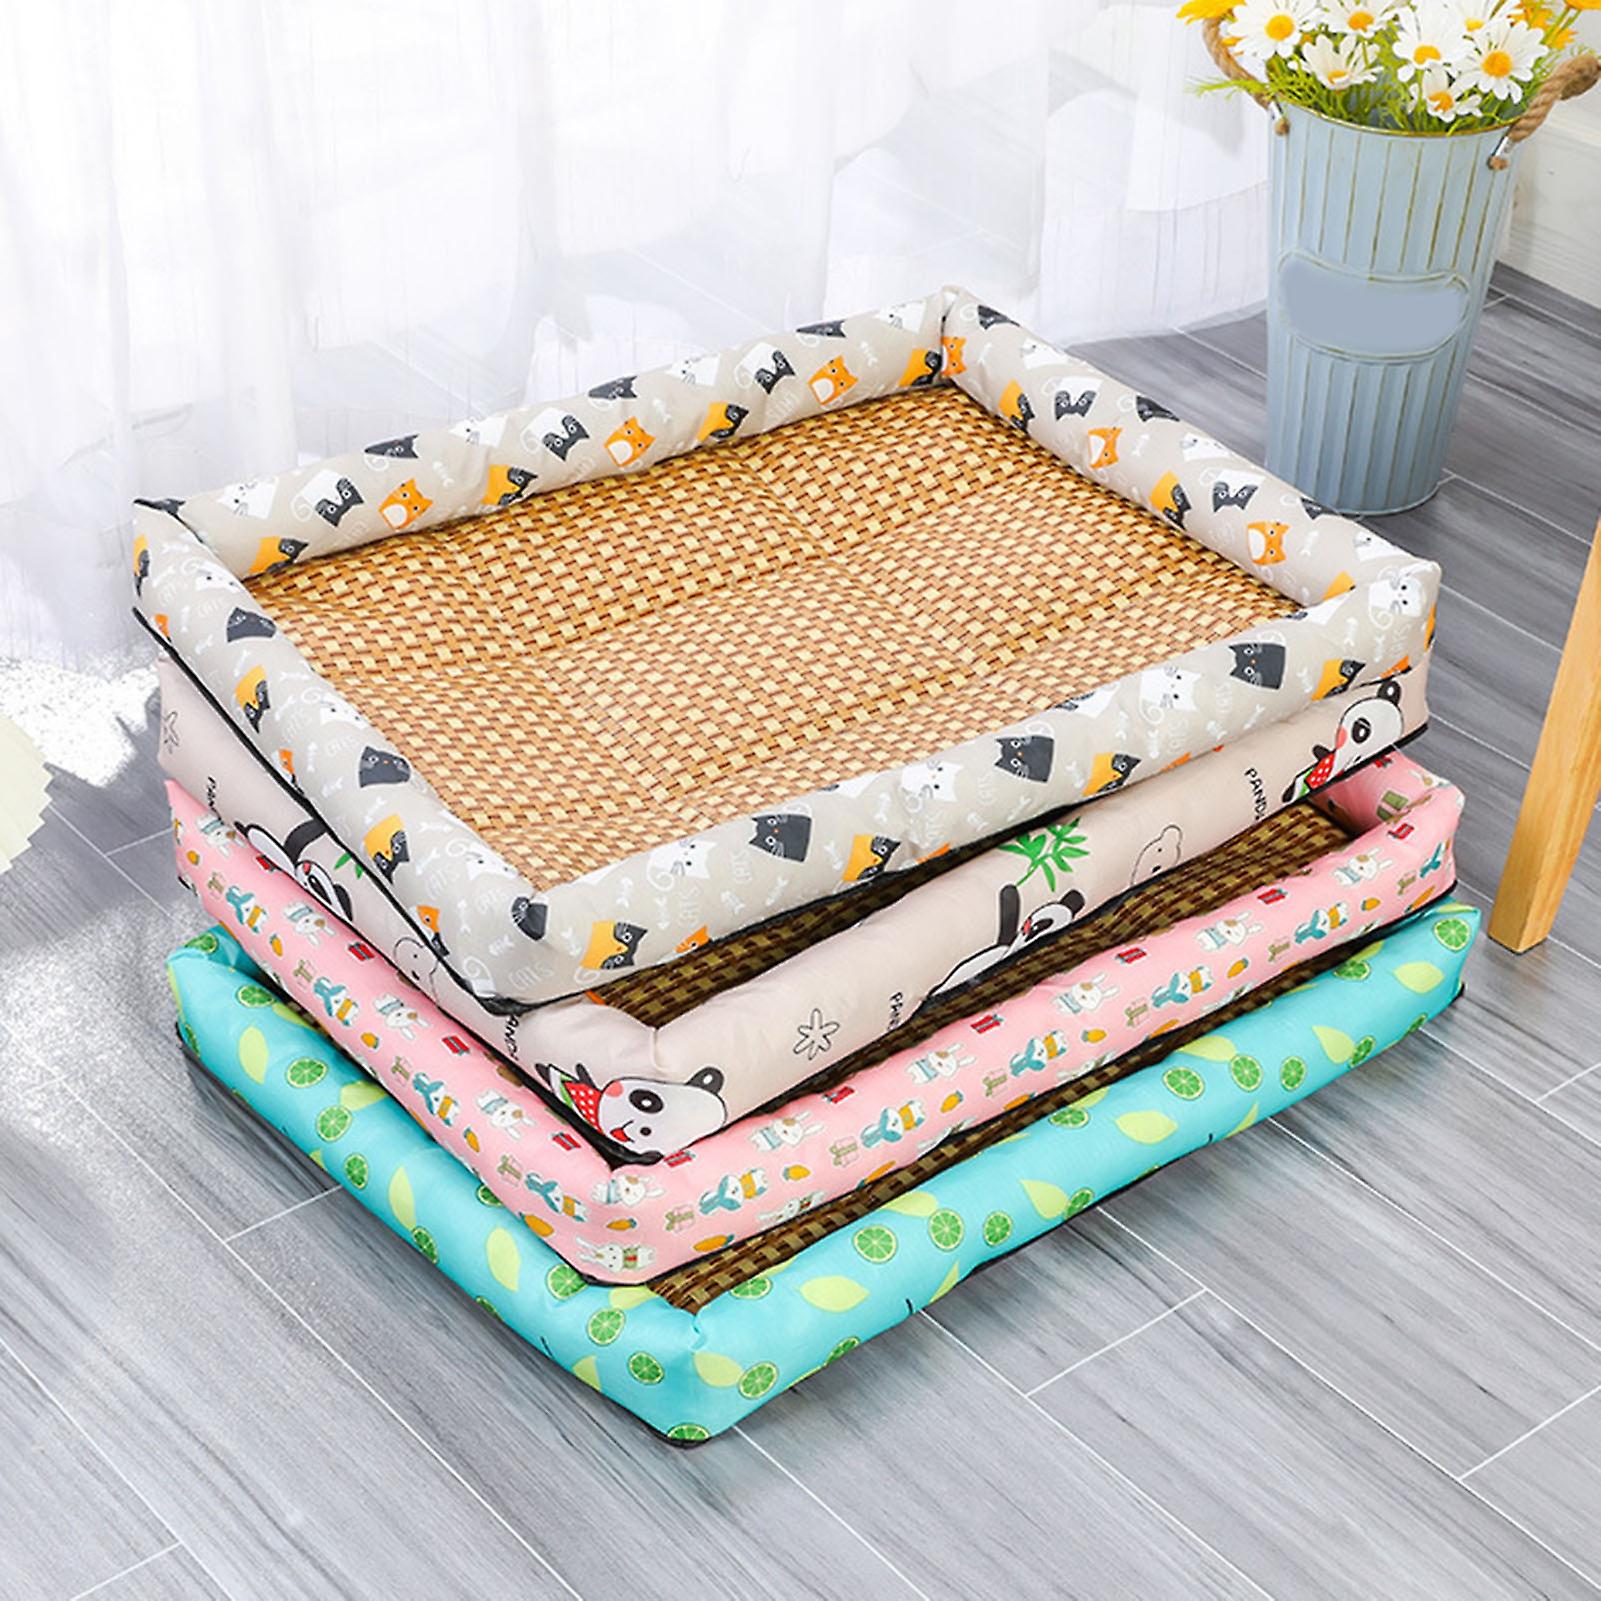 Summer Cooling Pet Bed - Natural Coolness, Plush Support, Freshness-Enhancing Fabric, Multiple Sizes - Ideal for Relaxation, Easy Maintenance